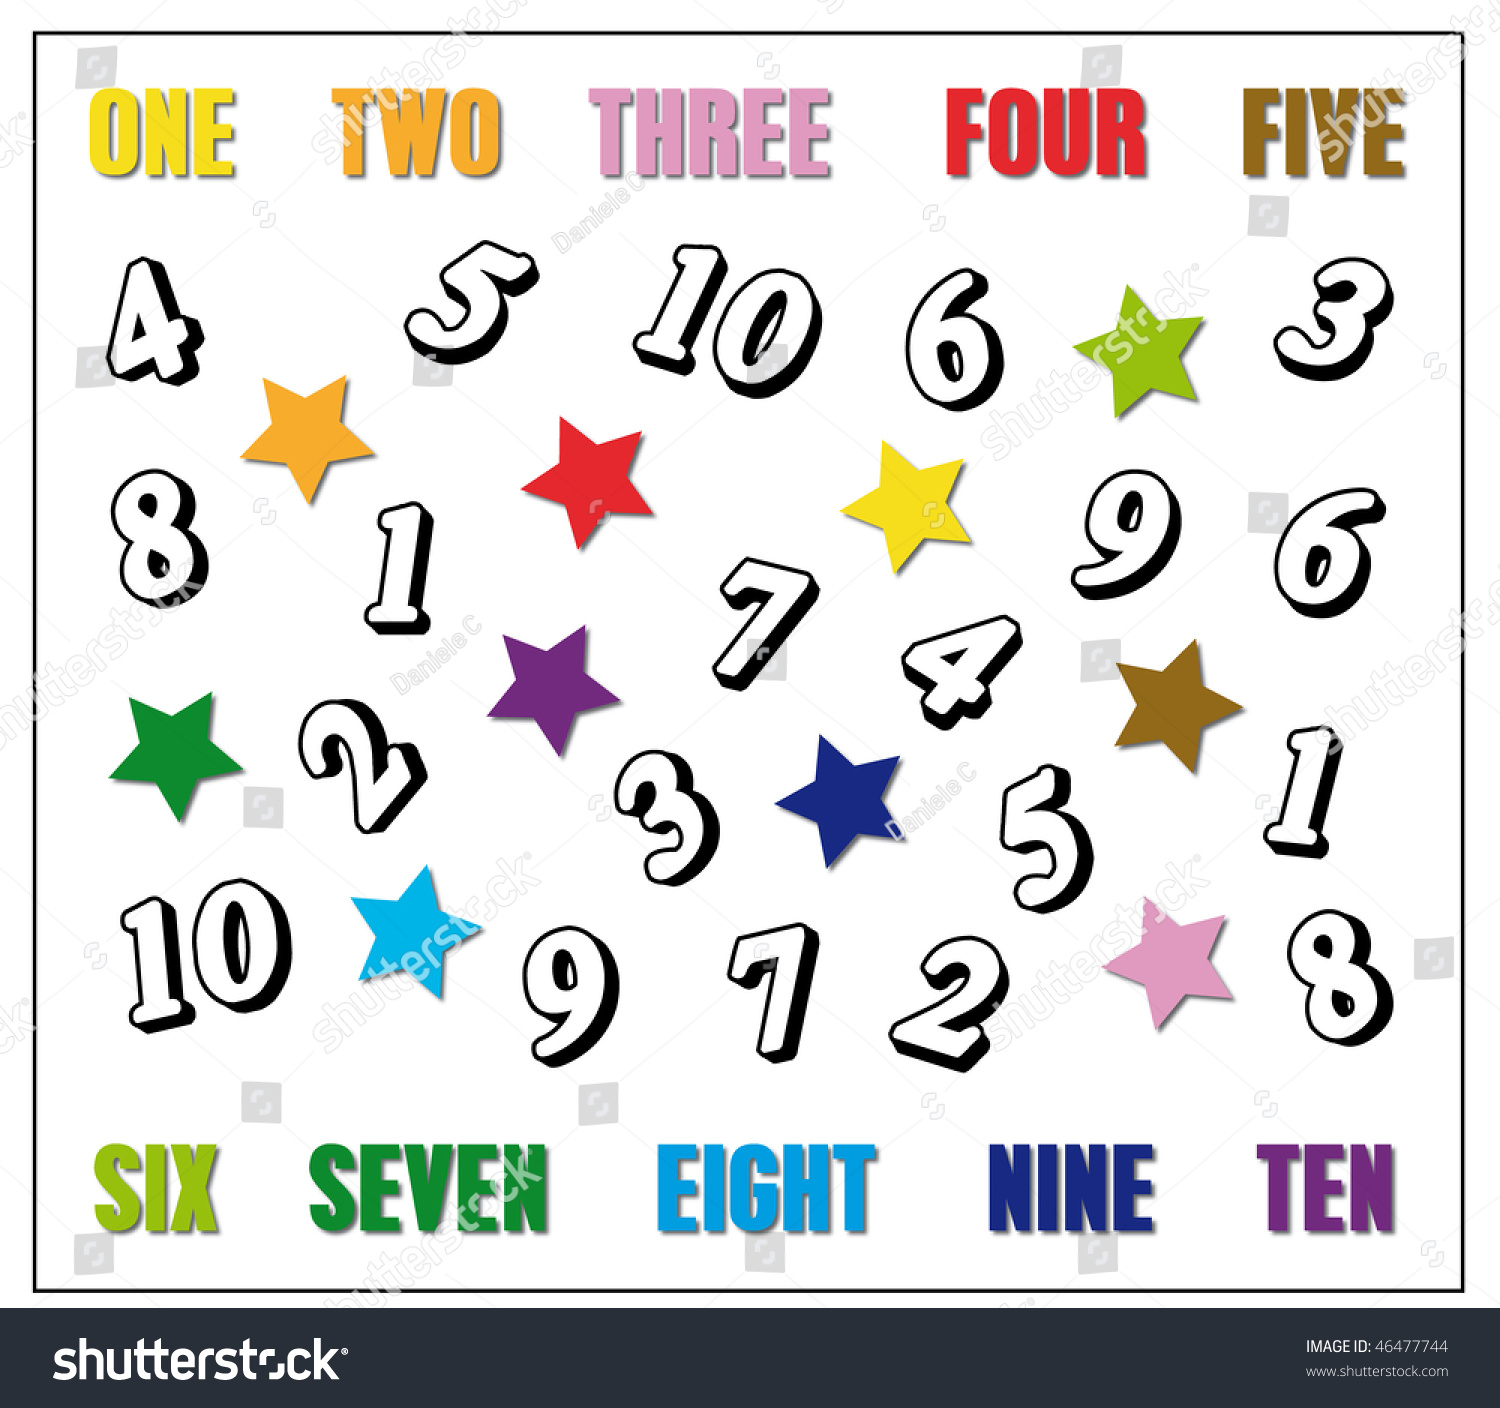 Color The Numbers With The Suggested Colors. I.E. Colour Numbers 1 With